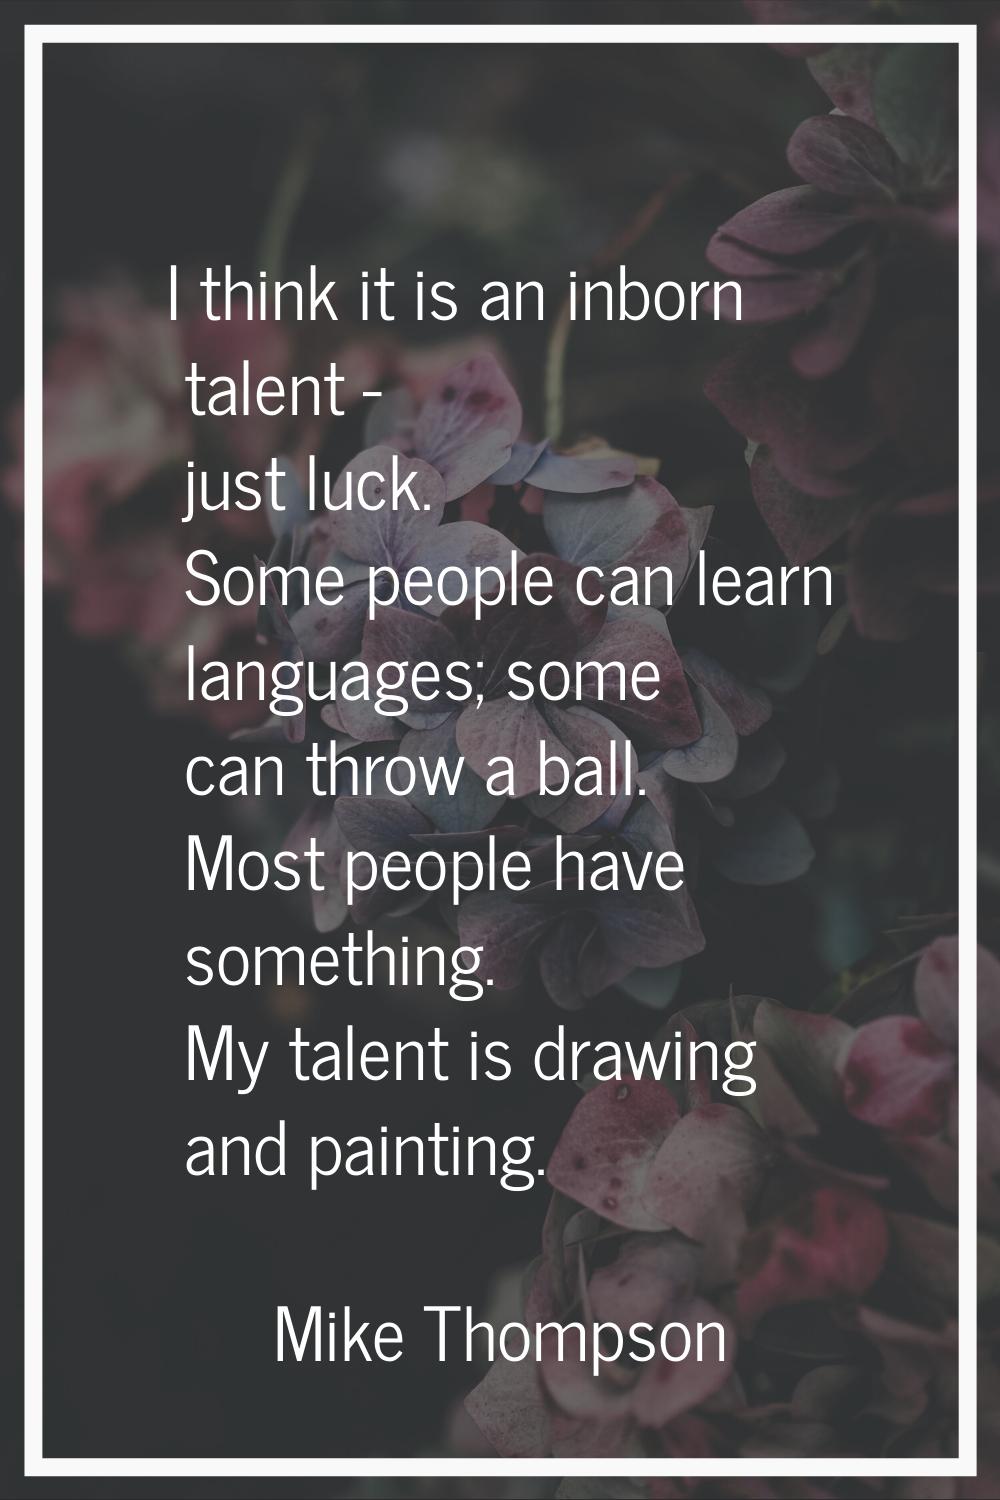 I think it is an inborn talent - just luck. Some people can learn languages; some can throw a ball.